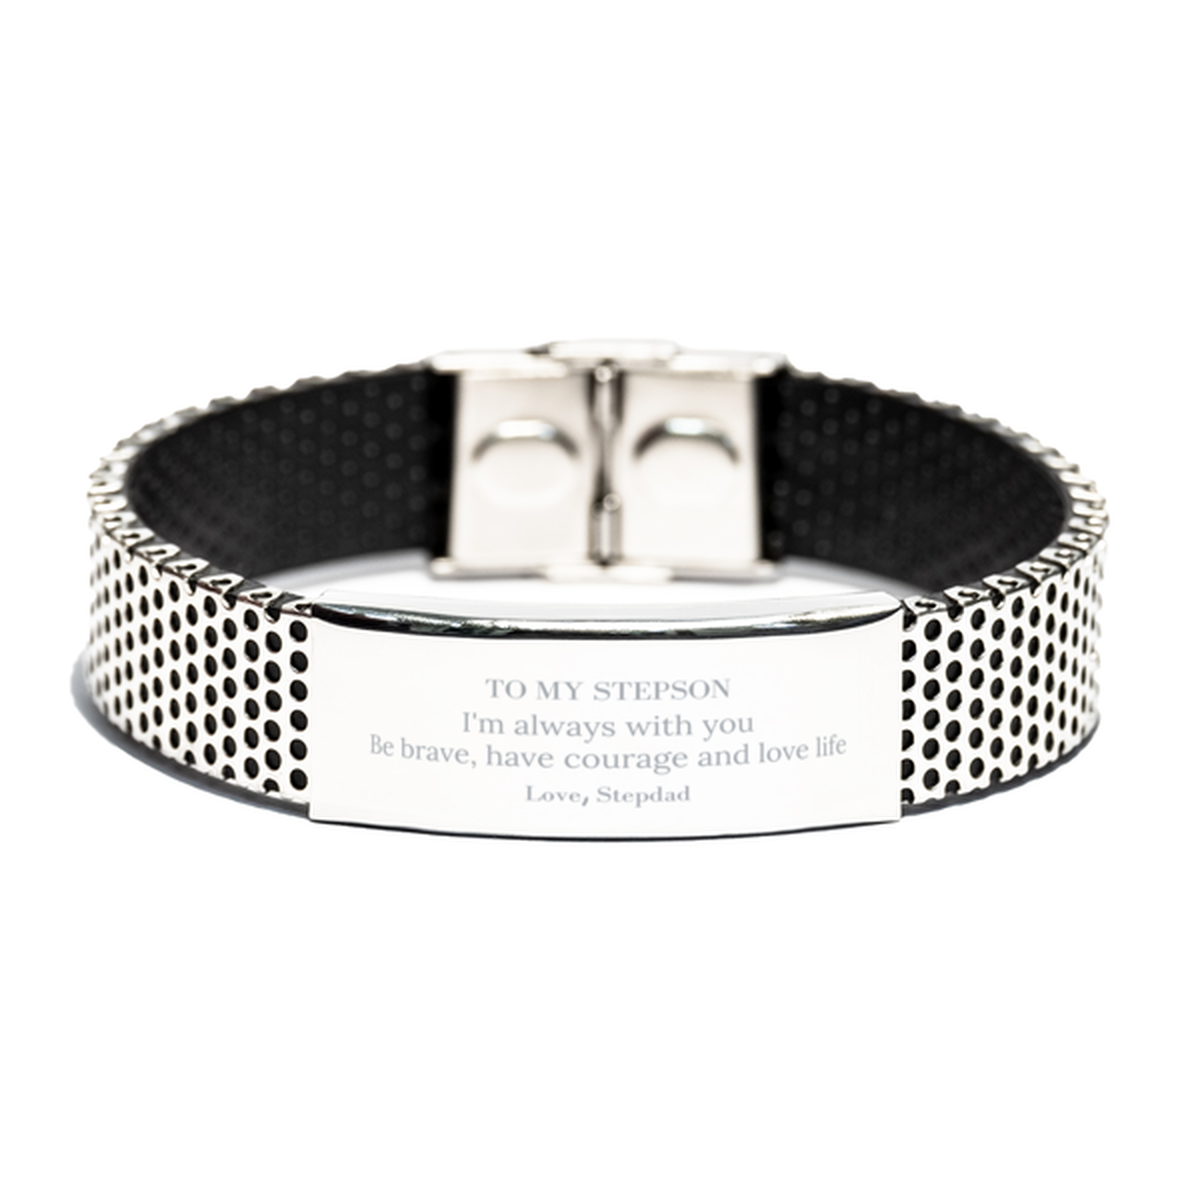 To My Stepson Gifts from Stepdad, Unique Stainless Steel Bracelet Inspirational Christmas Birthday Graduation Gifts for Stepson I'm always with you. Be brave, have courage and love life. Love, Stepdad